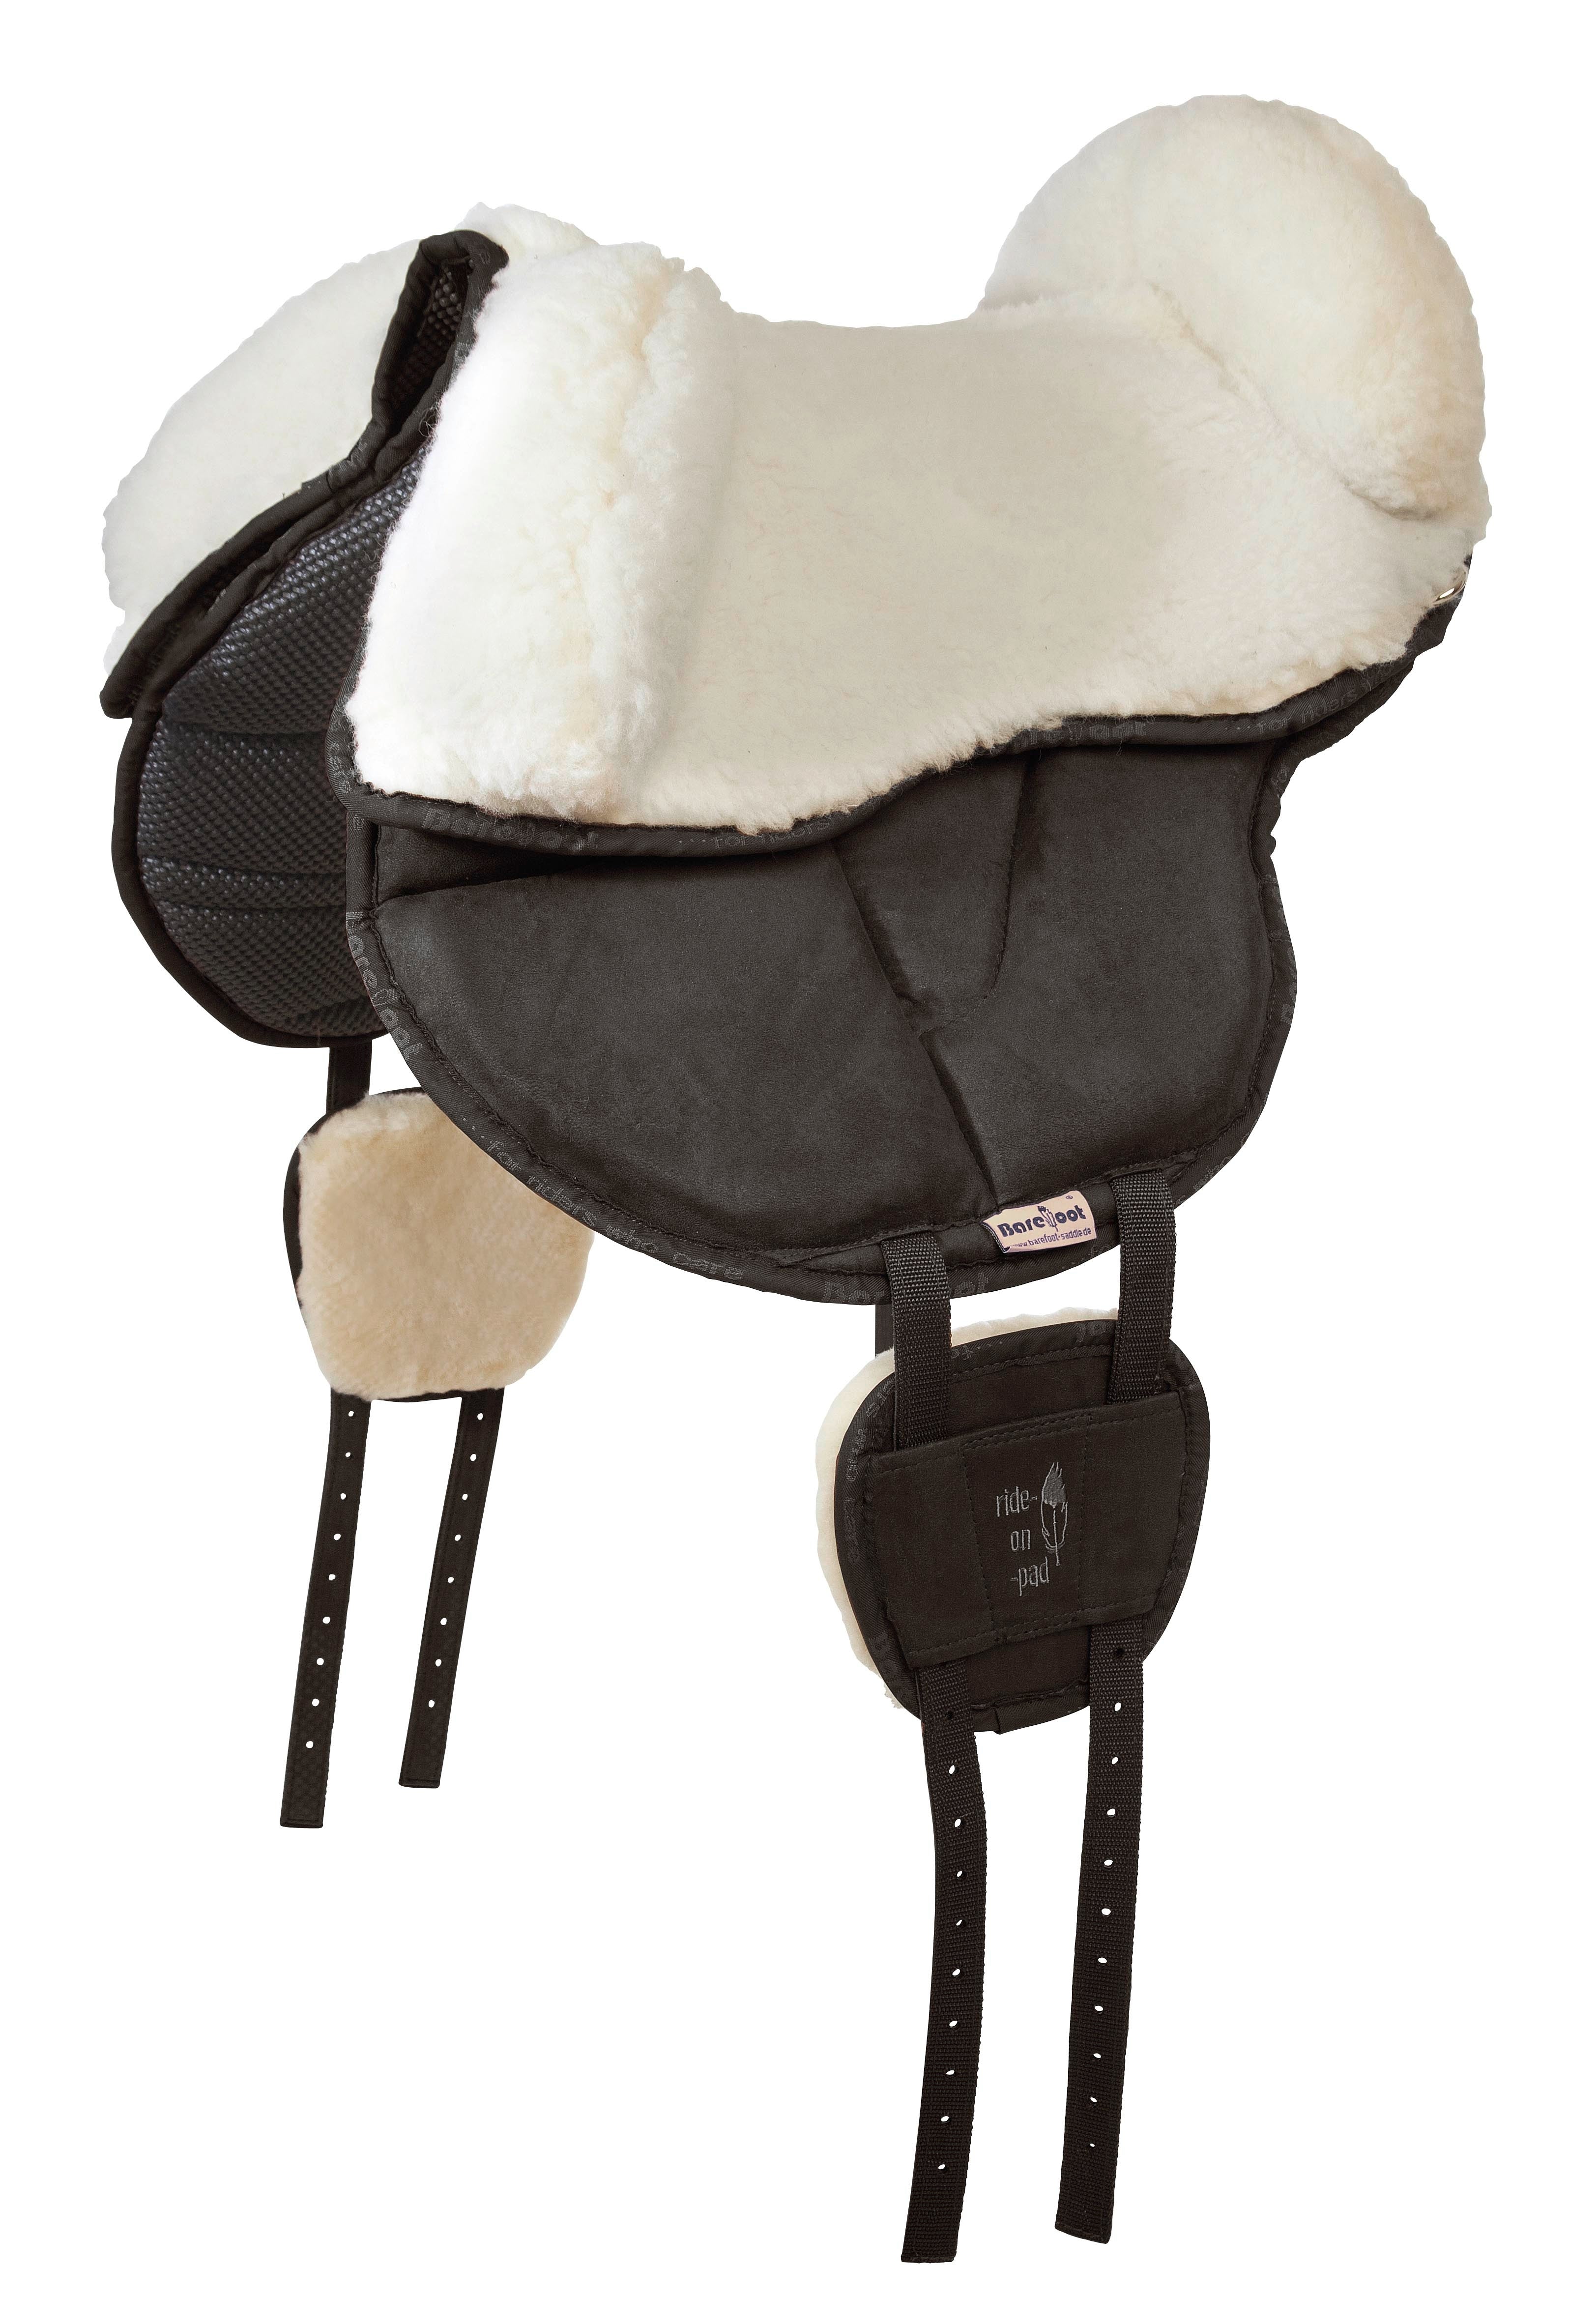 Barefoot sheep's wool seat with rolls for riding cushion "Ride-On-Pad"